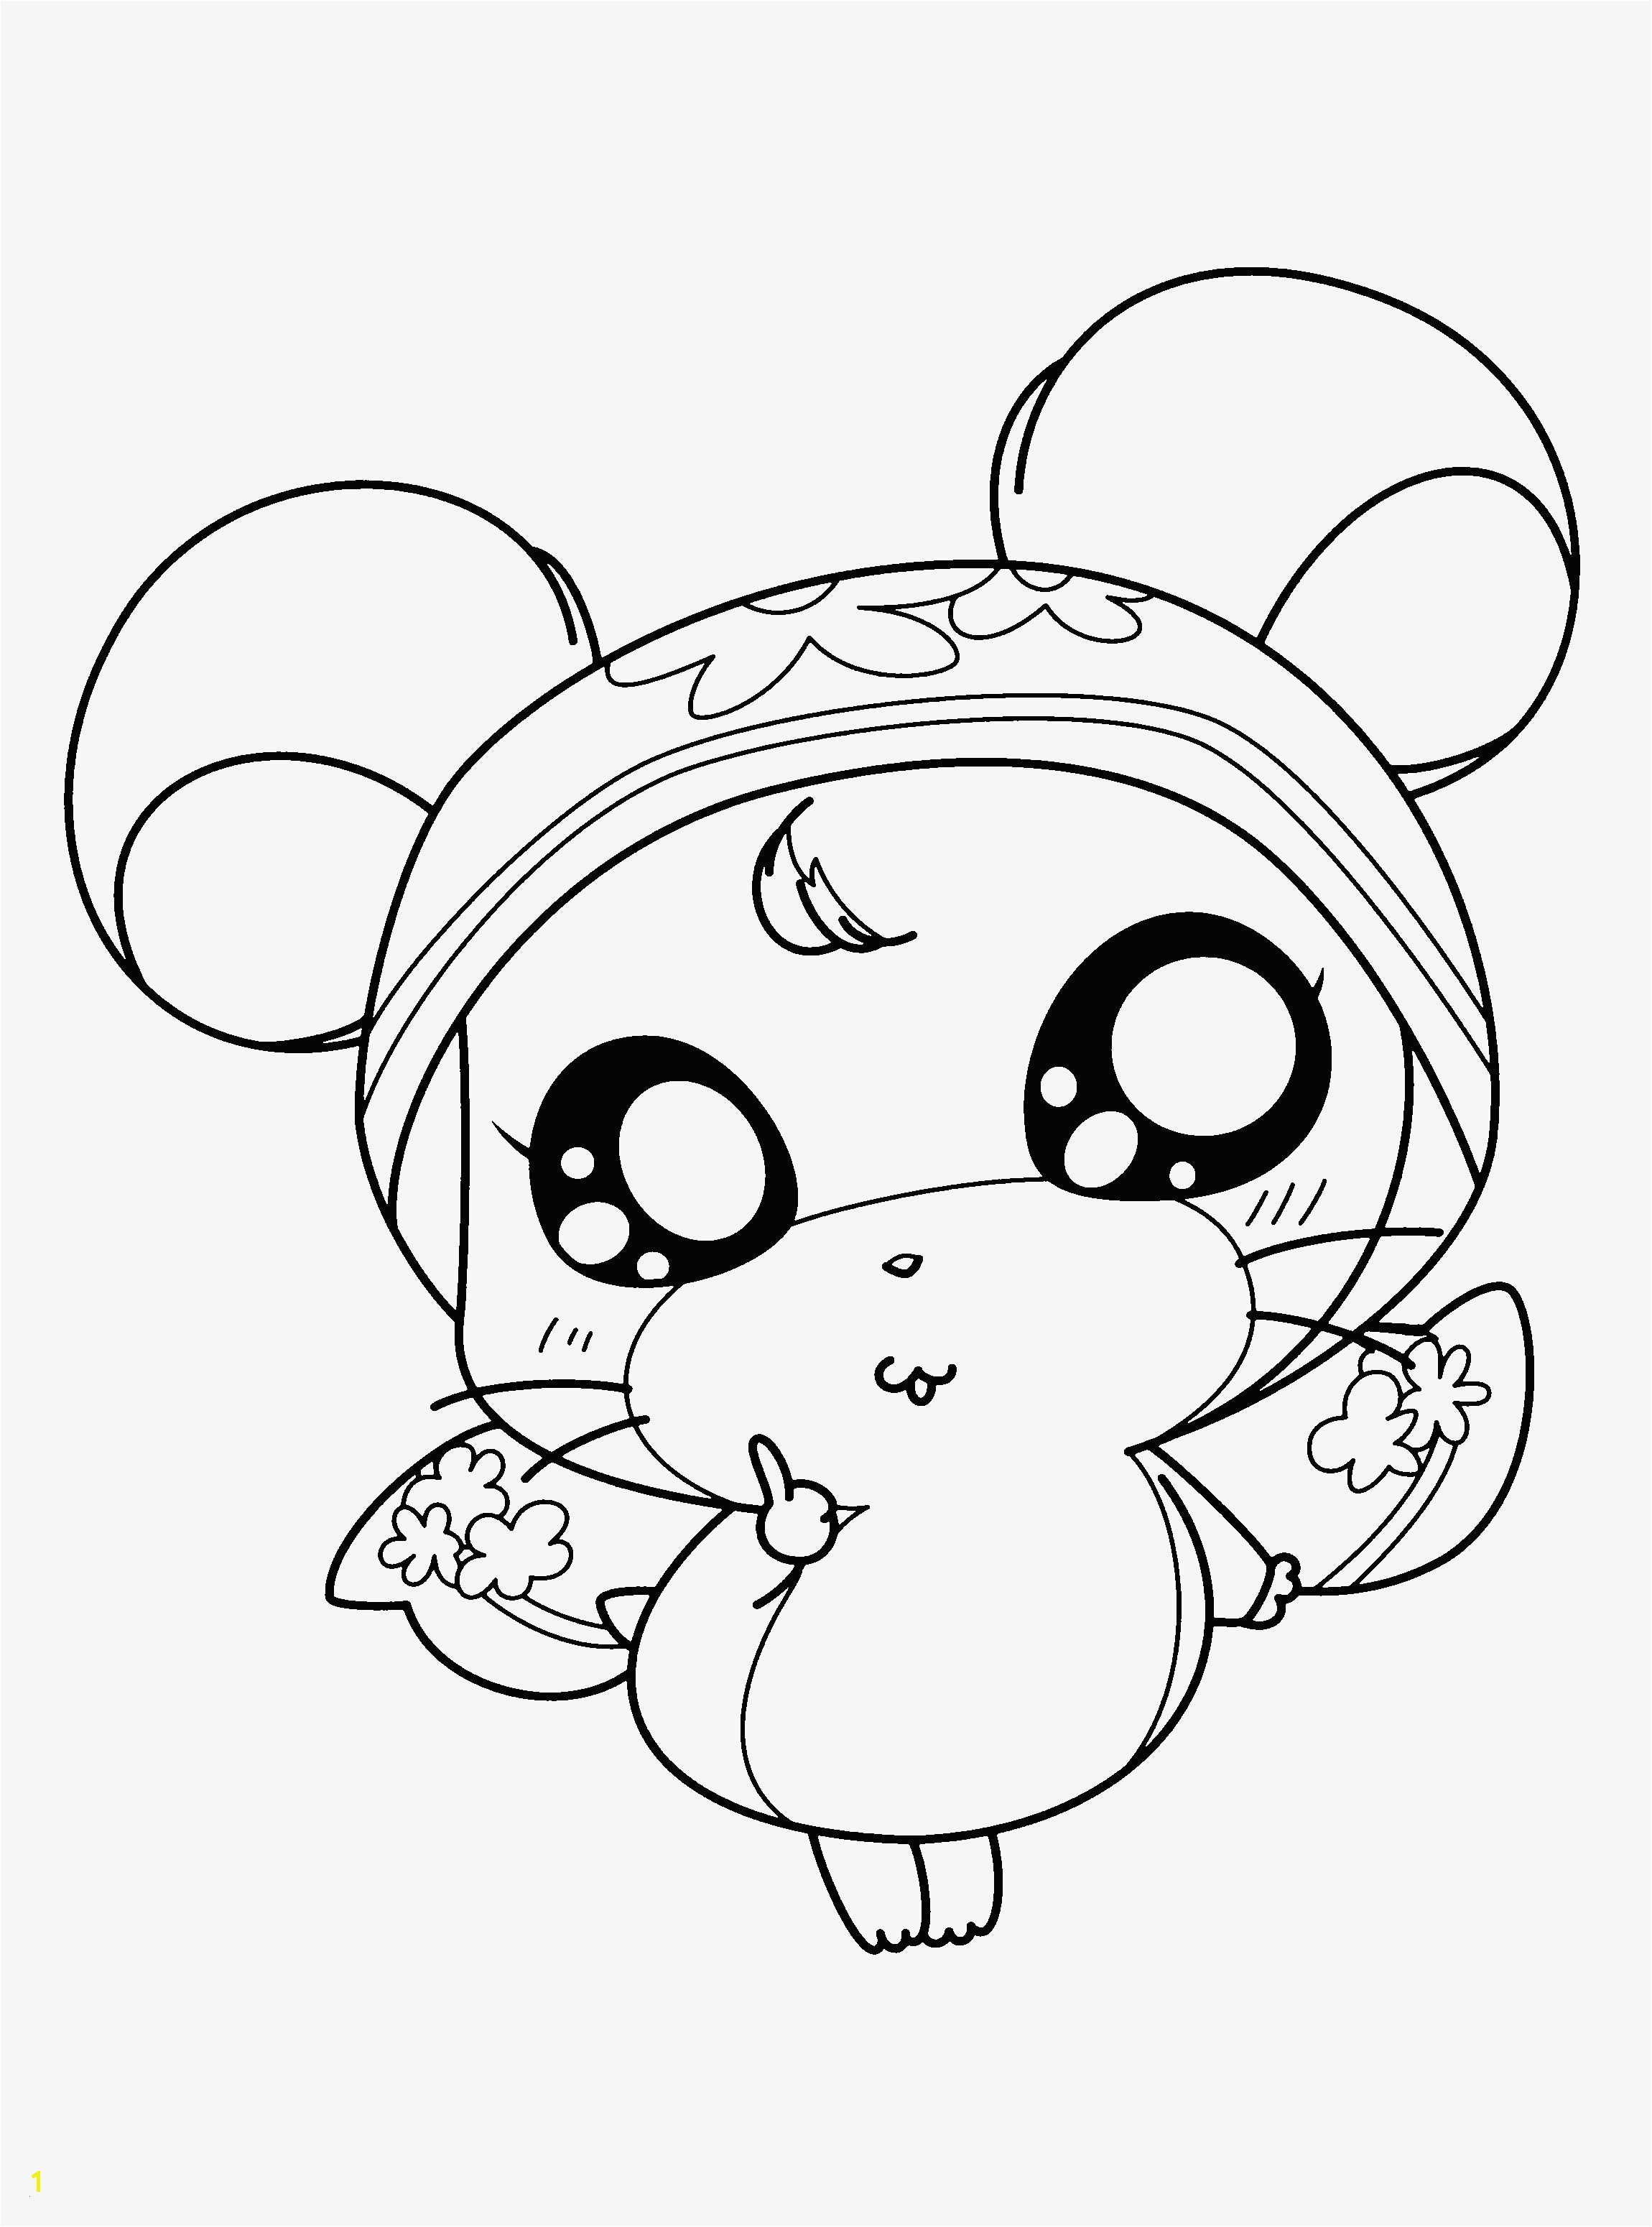 Baby Animal Coloring Pages 12 Luxury Cute Animal Coloring Pages